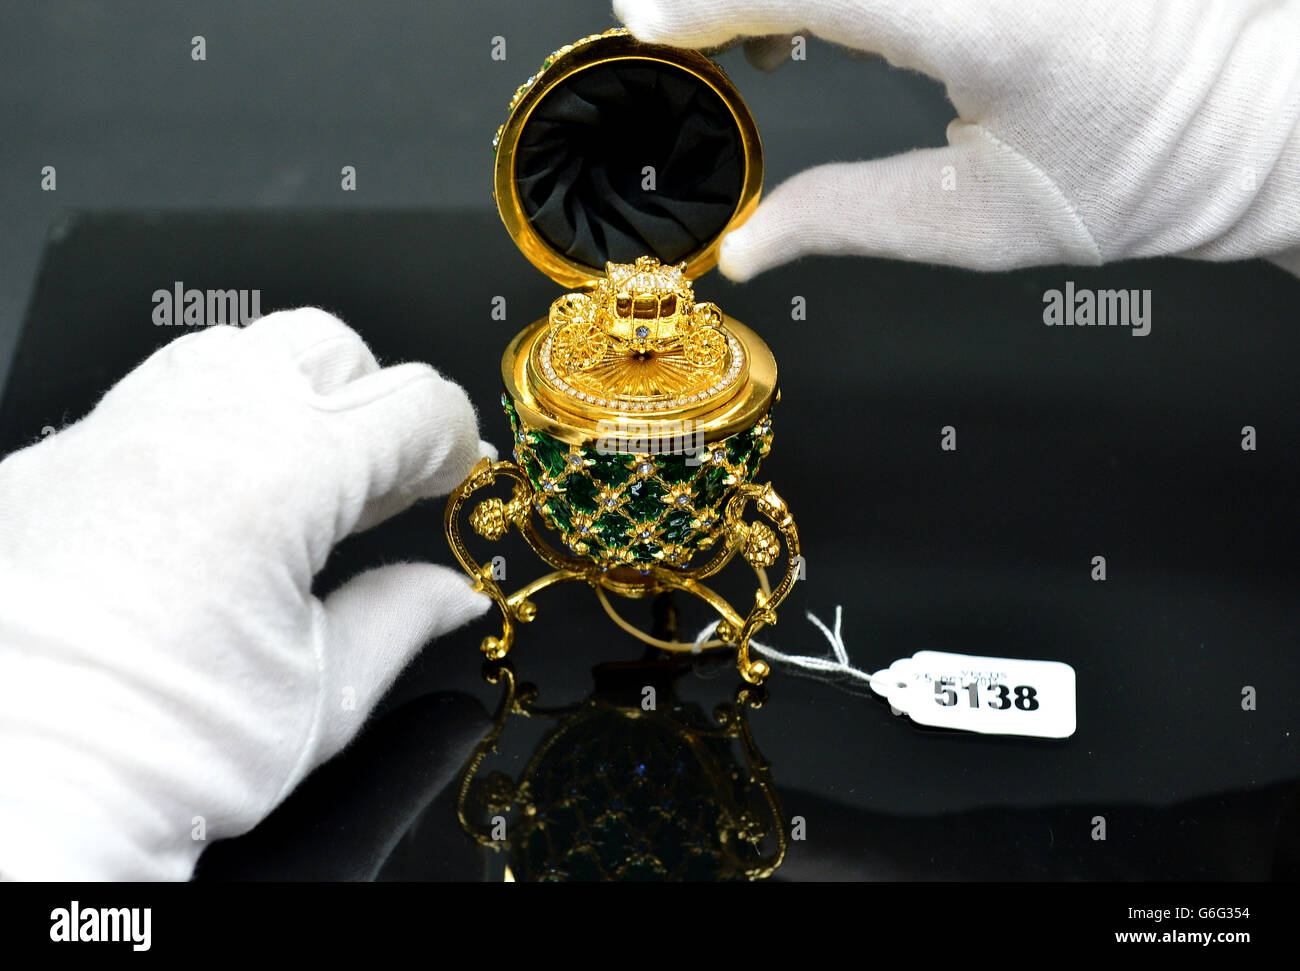 A Swarovski fine detailed replica prop of a Faberge Egg taken from the  James Bond film"Octopussy", finished in 22 carat gold and encrusted with 96  Swarovski crystals which is to be auctioned